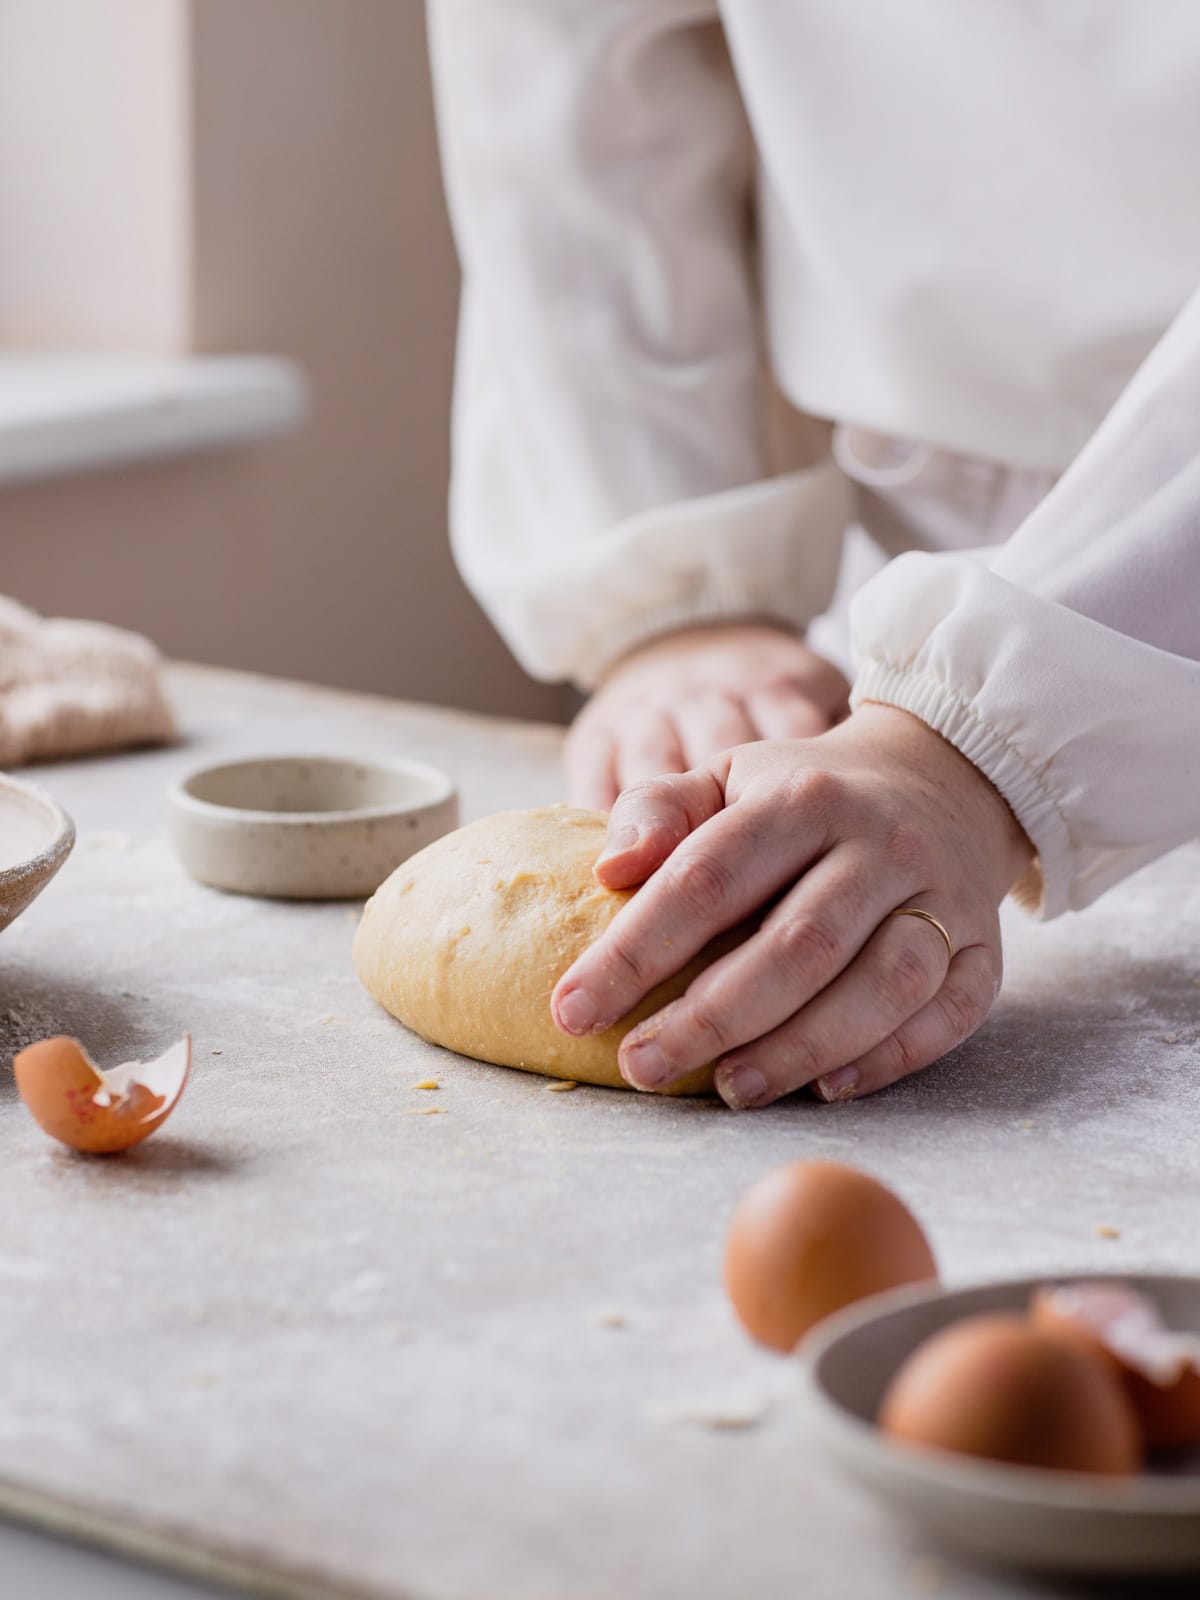 Hand kneading the pasta dough on a backdrop with egg shells around